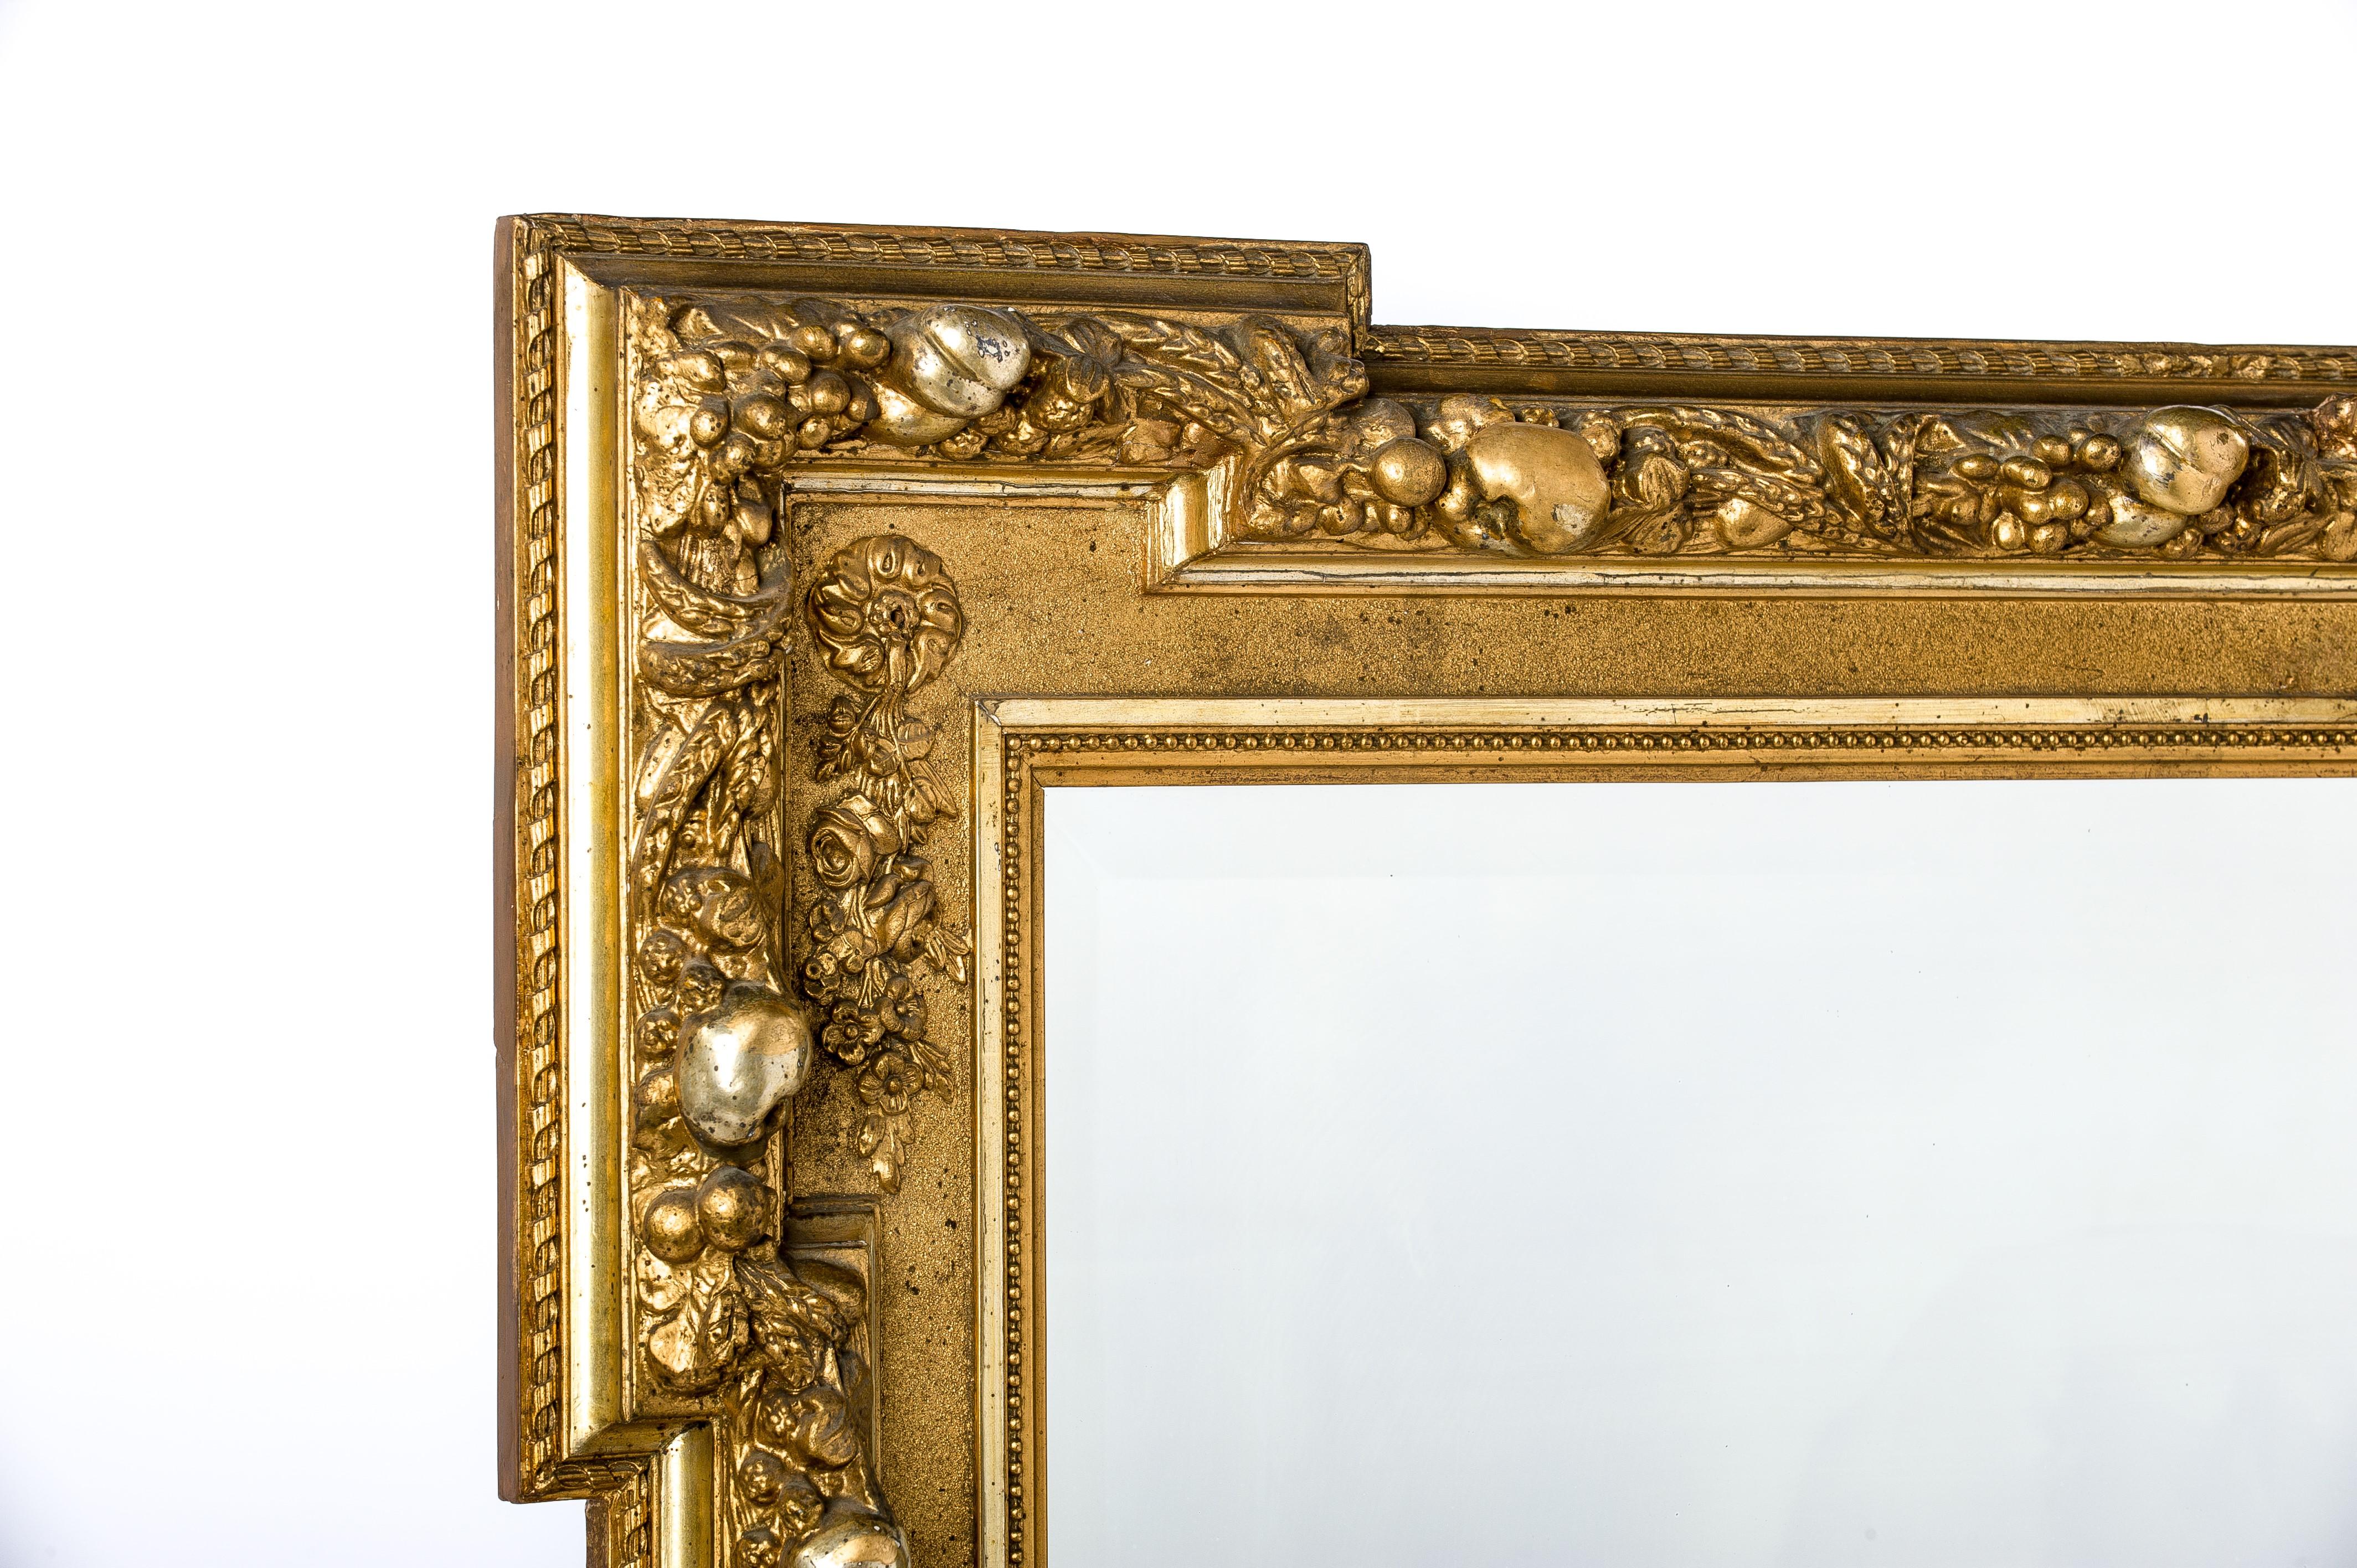 This beautiful antique French rectangular overmantle mirror was made in Northern France in 1905. 
The mirror is elaborately decorated with fruits of the harvest. It shows plums, pears, apples, grapes, blackberries, cherries, and grain. 
The mirror